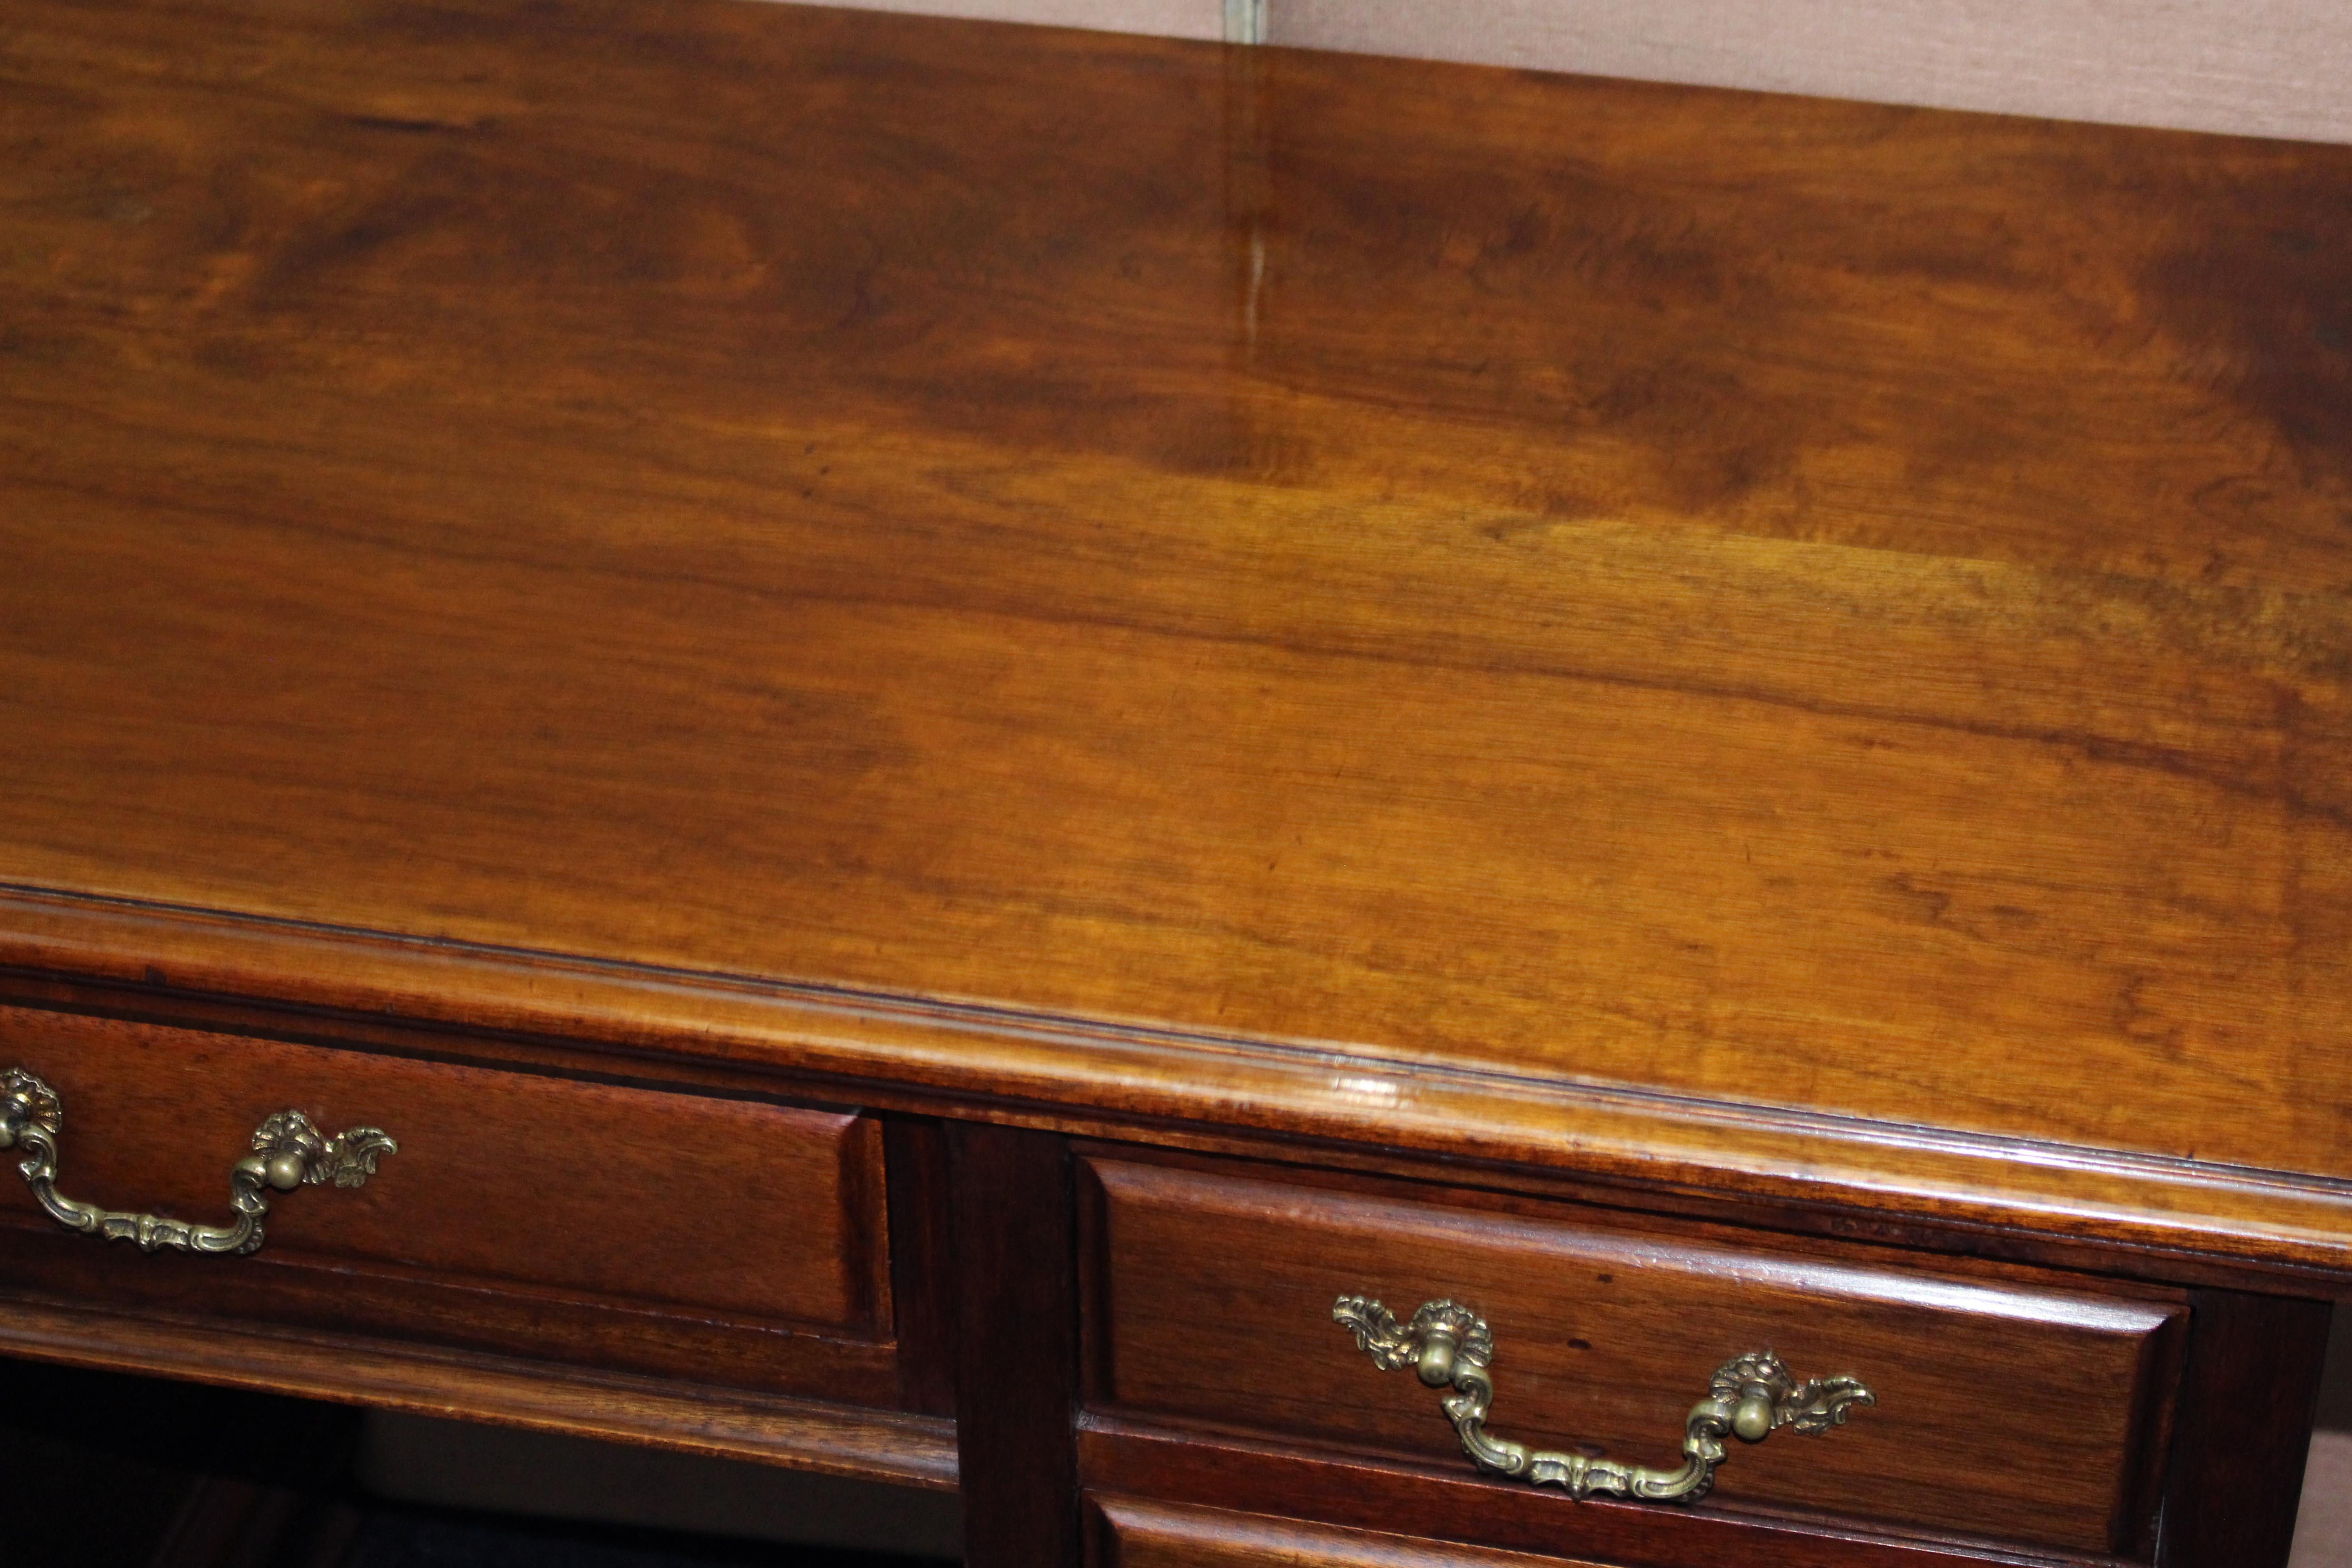 Desk
Period: Edwardian
Wood: Walnut.




Quality Edwardian walnut pedestal desk with brass handles.

Four drawers to either side, single drawer to the middle.

Quality heavy brass handles, attractive feet.

A very well made piece of